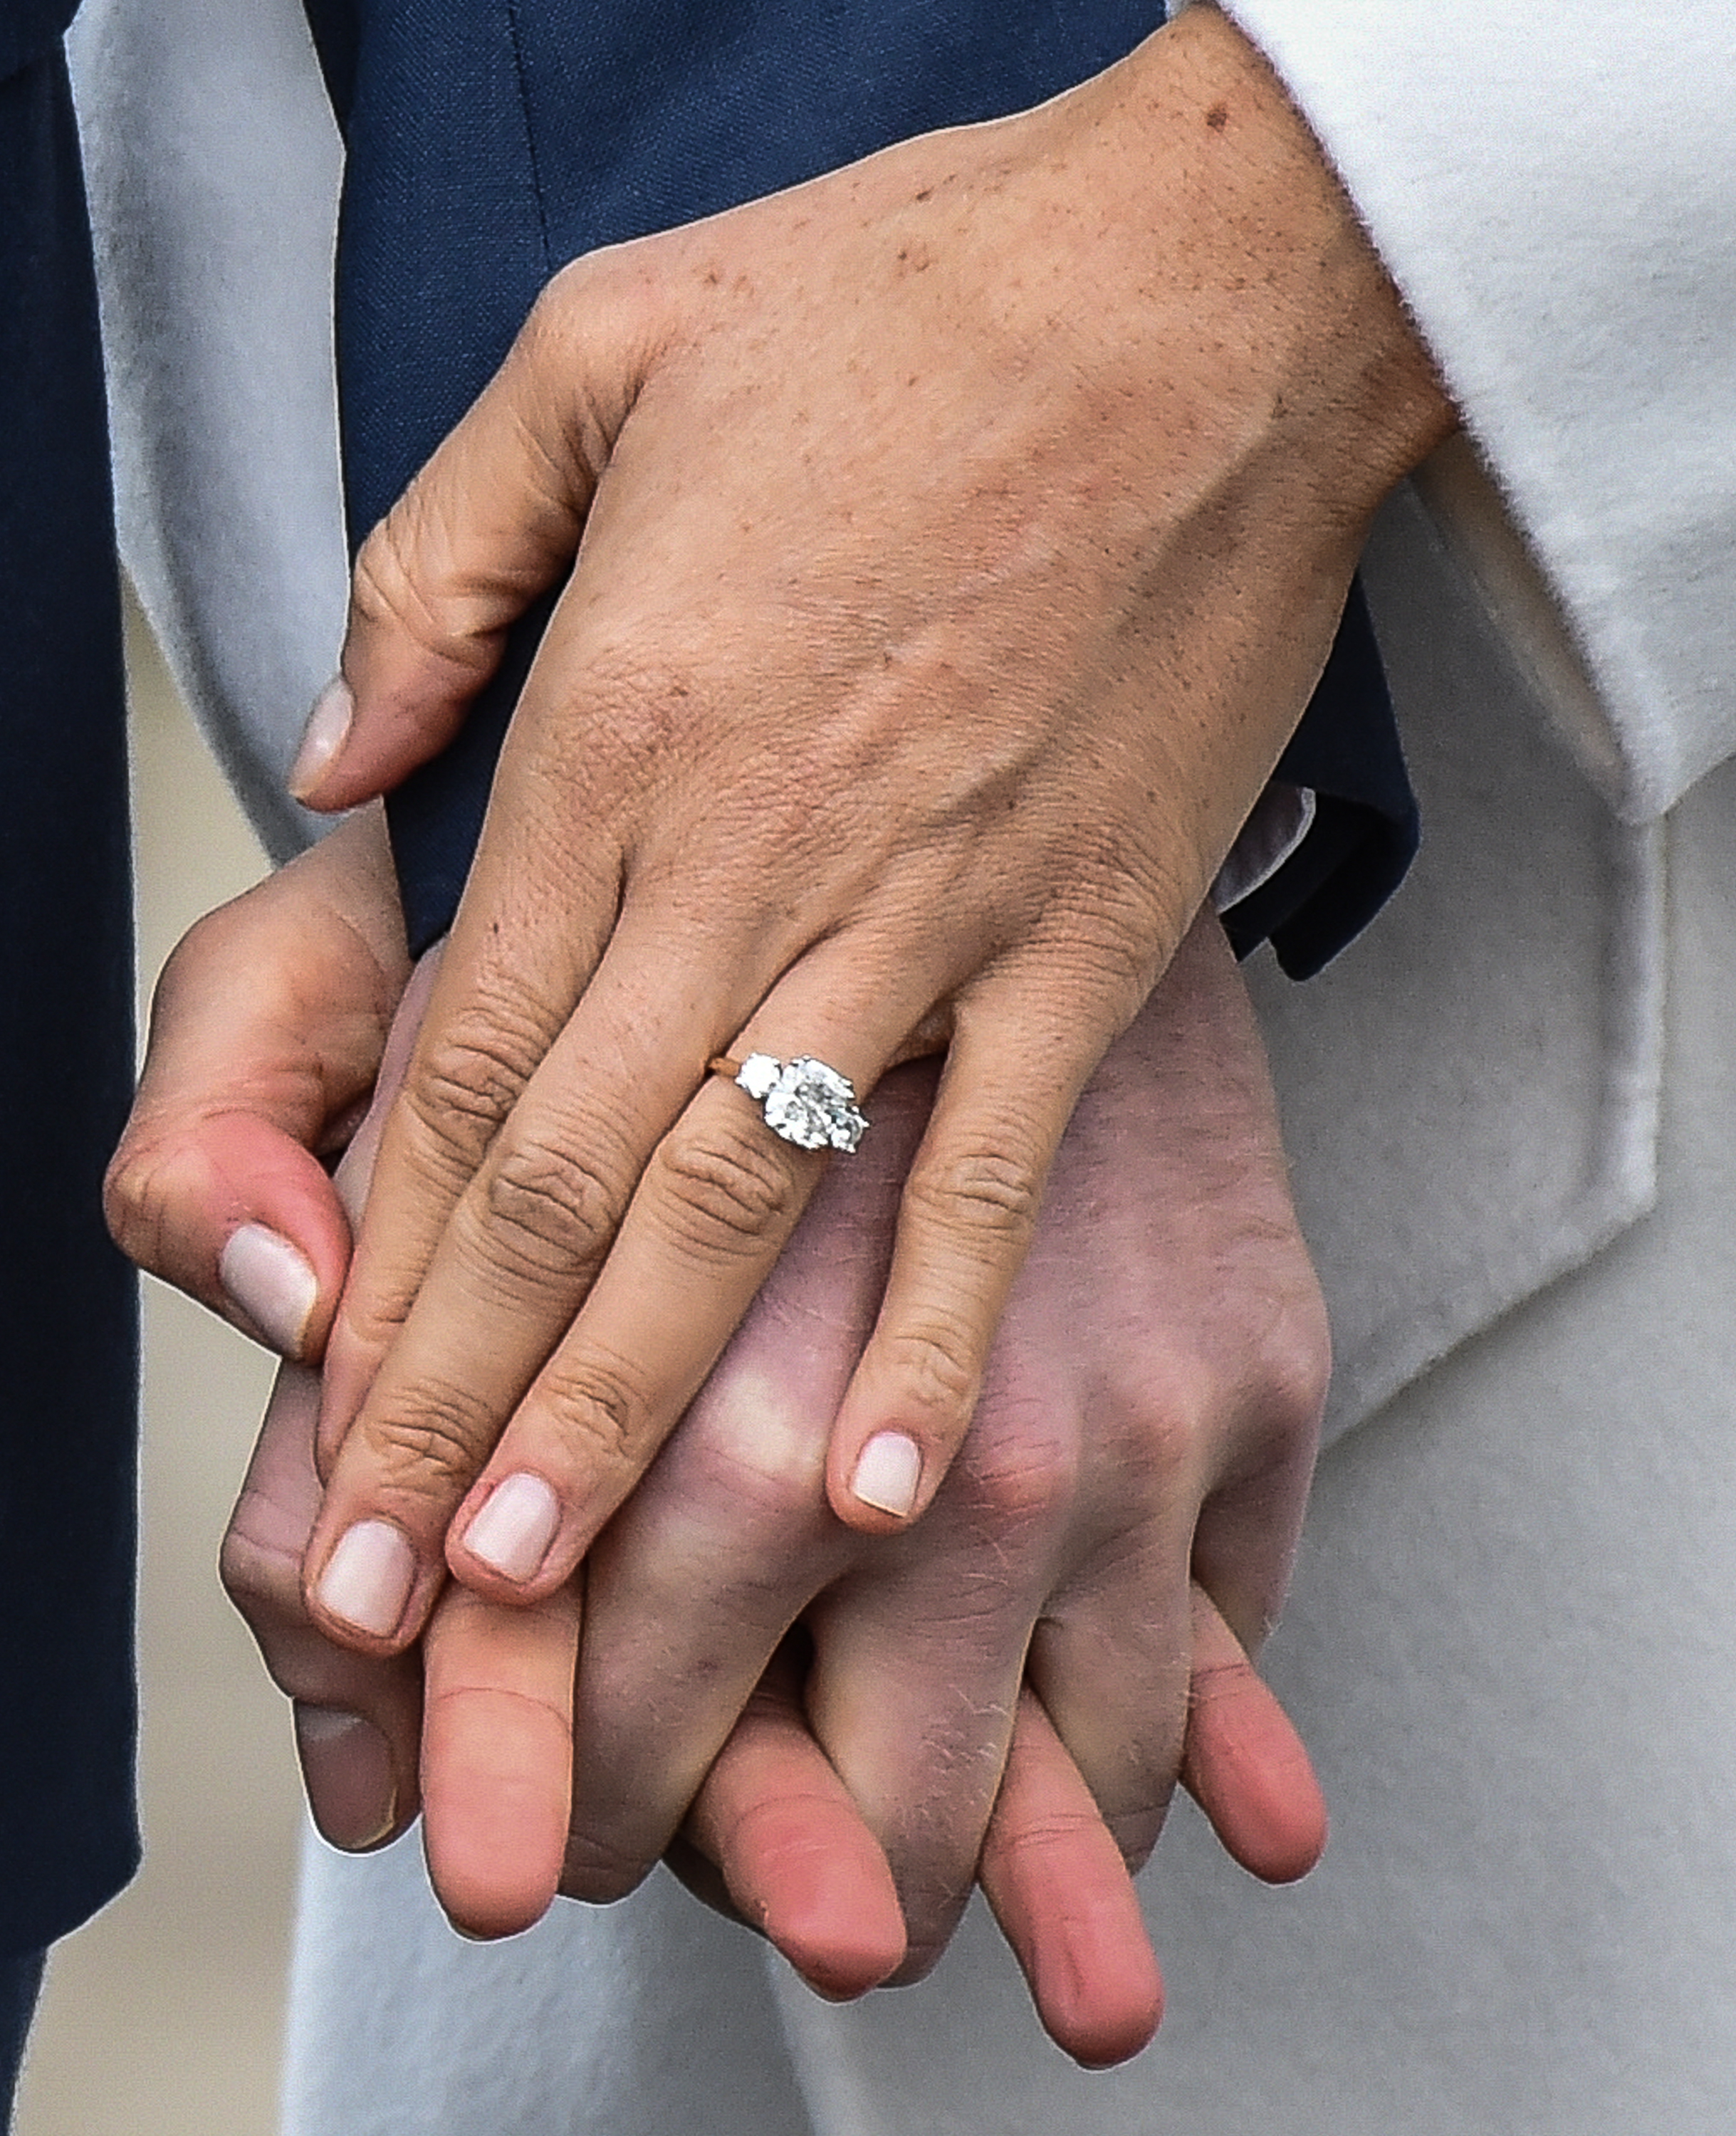 A close up of Meghan Markle's engagement ring during an official photocall to announce the engagement of Prince Harry and actress Meghan Markle  at Kensington Palace on November 27, 2017 in London, England | Source: Getty Images